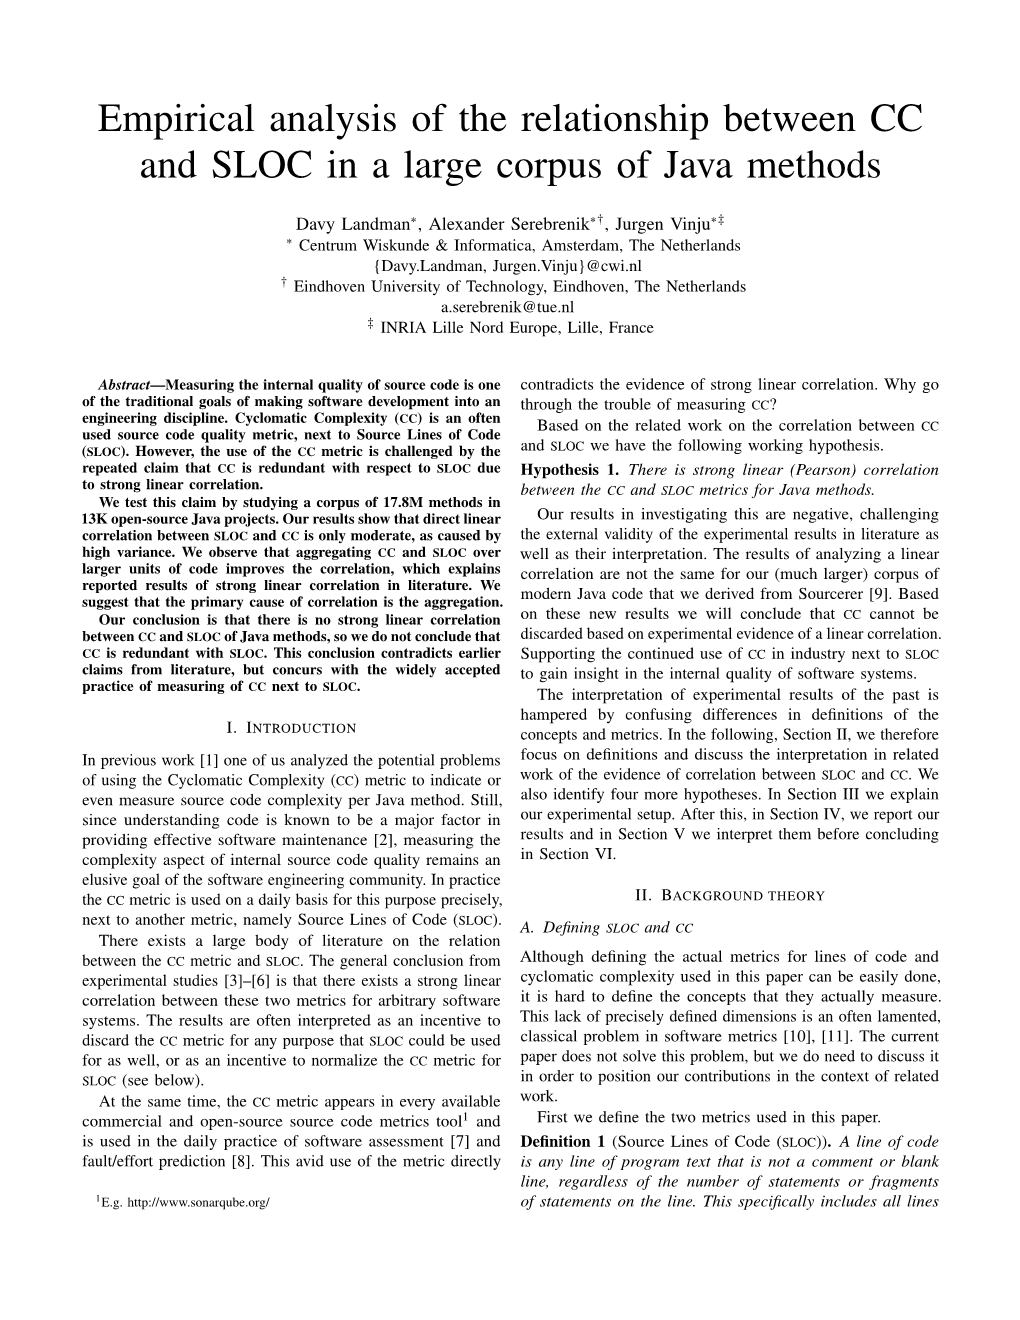 Empirical Analysis of the Relationship Between CC and SLOC in a Large Corpus of Java Methods